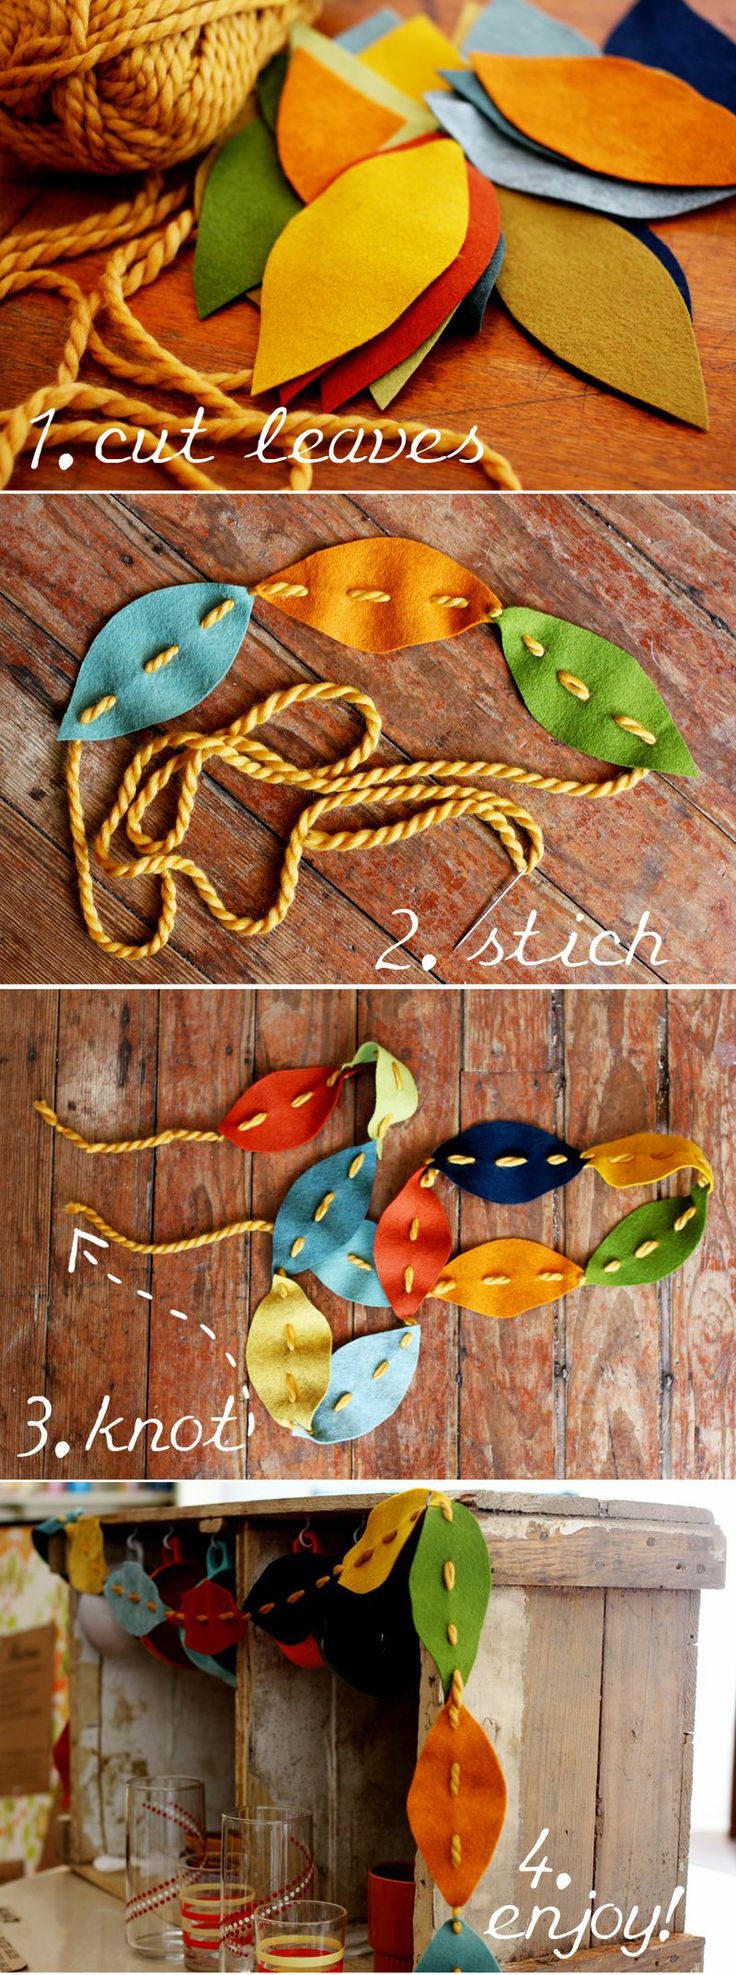 Family Matters, Fall Crafts, Grace Based Parenting, Leaf Garland, Pinterest